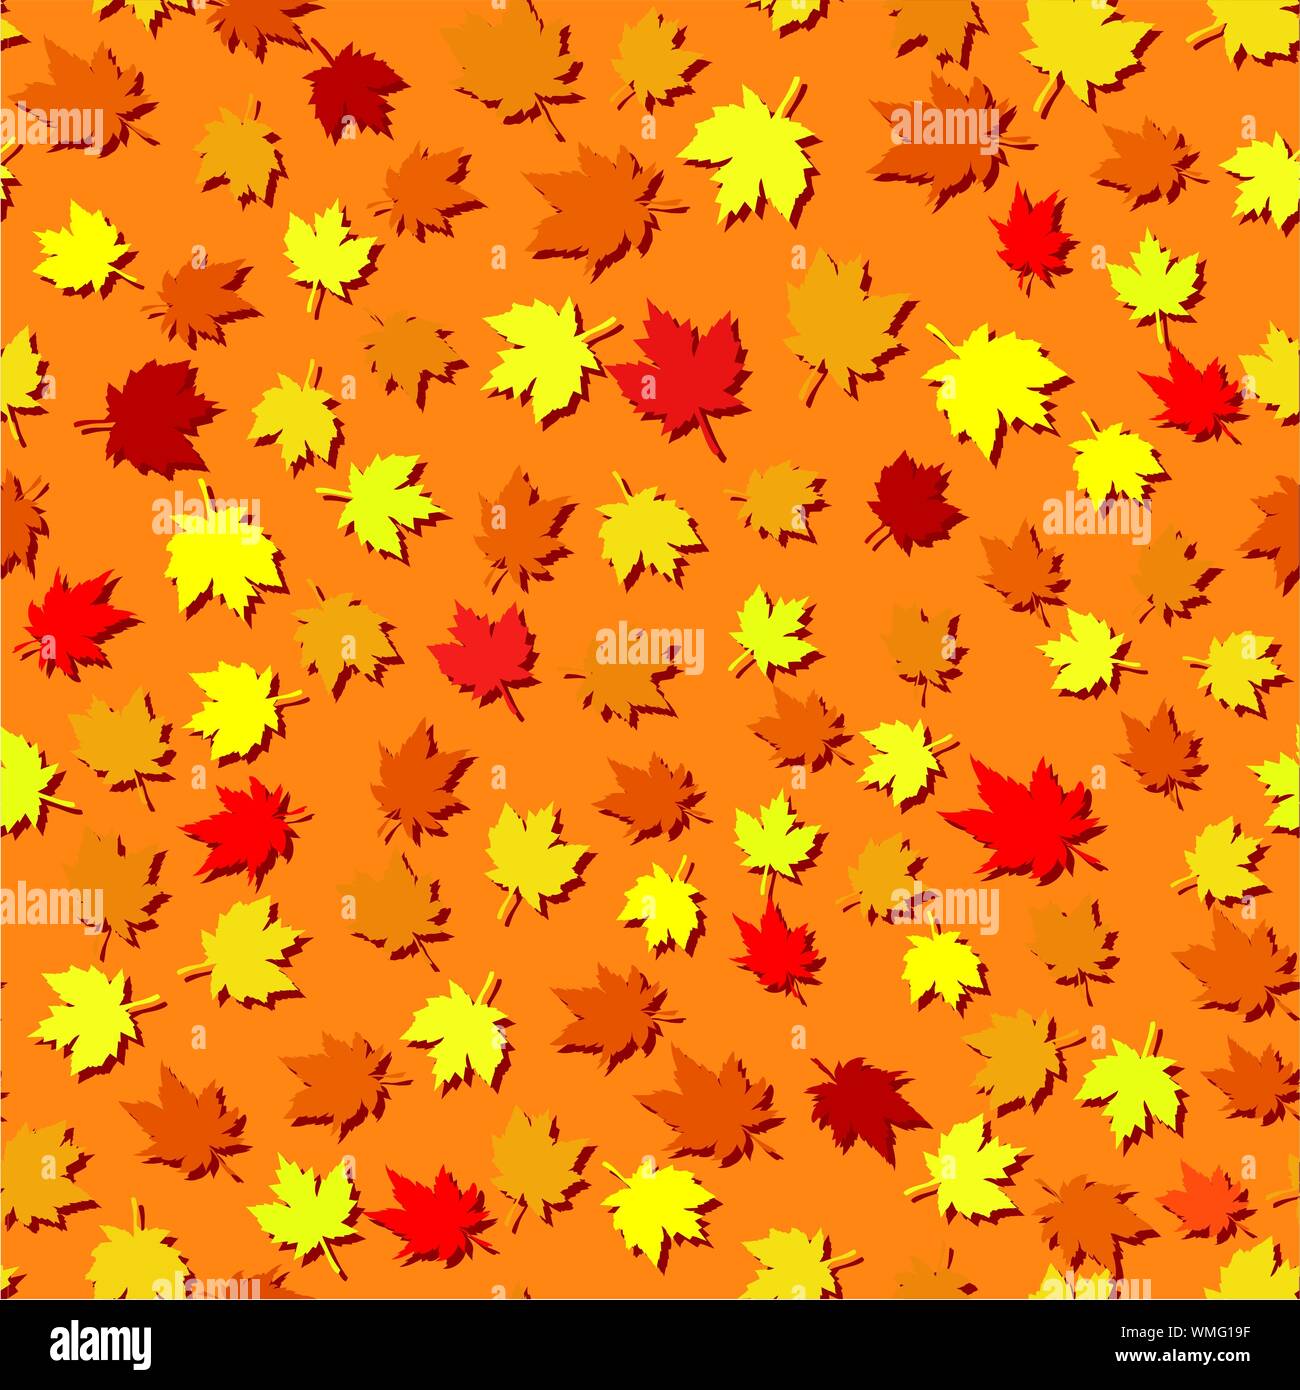 Autumn seamless background with maple leaves, vector illustration Stock Vector